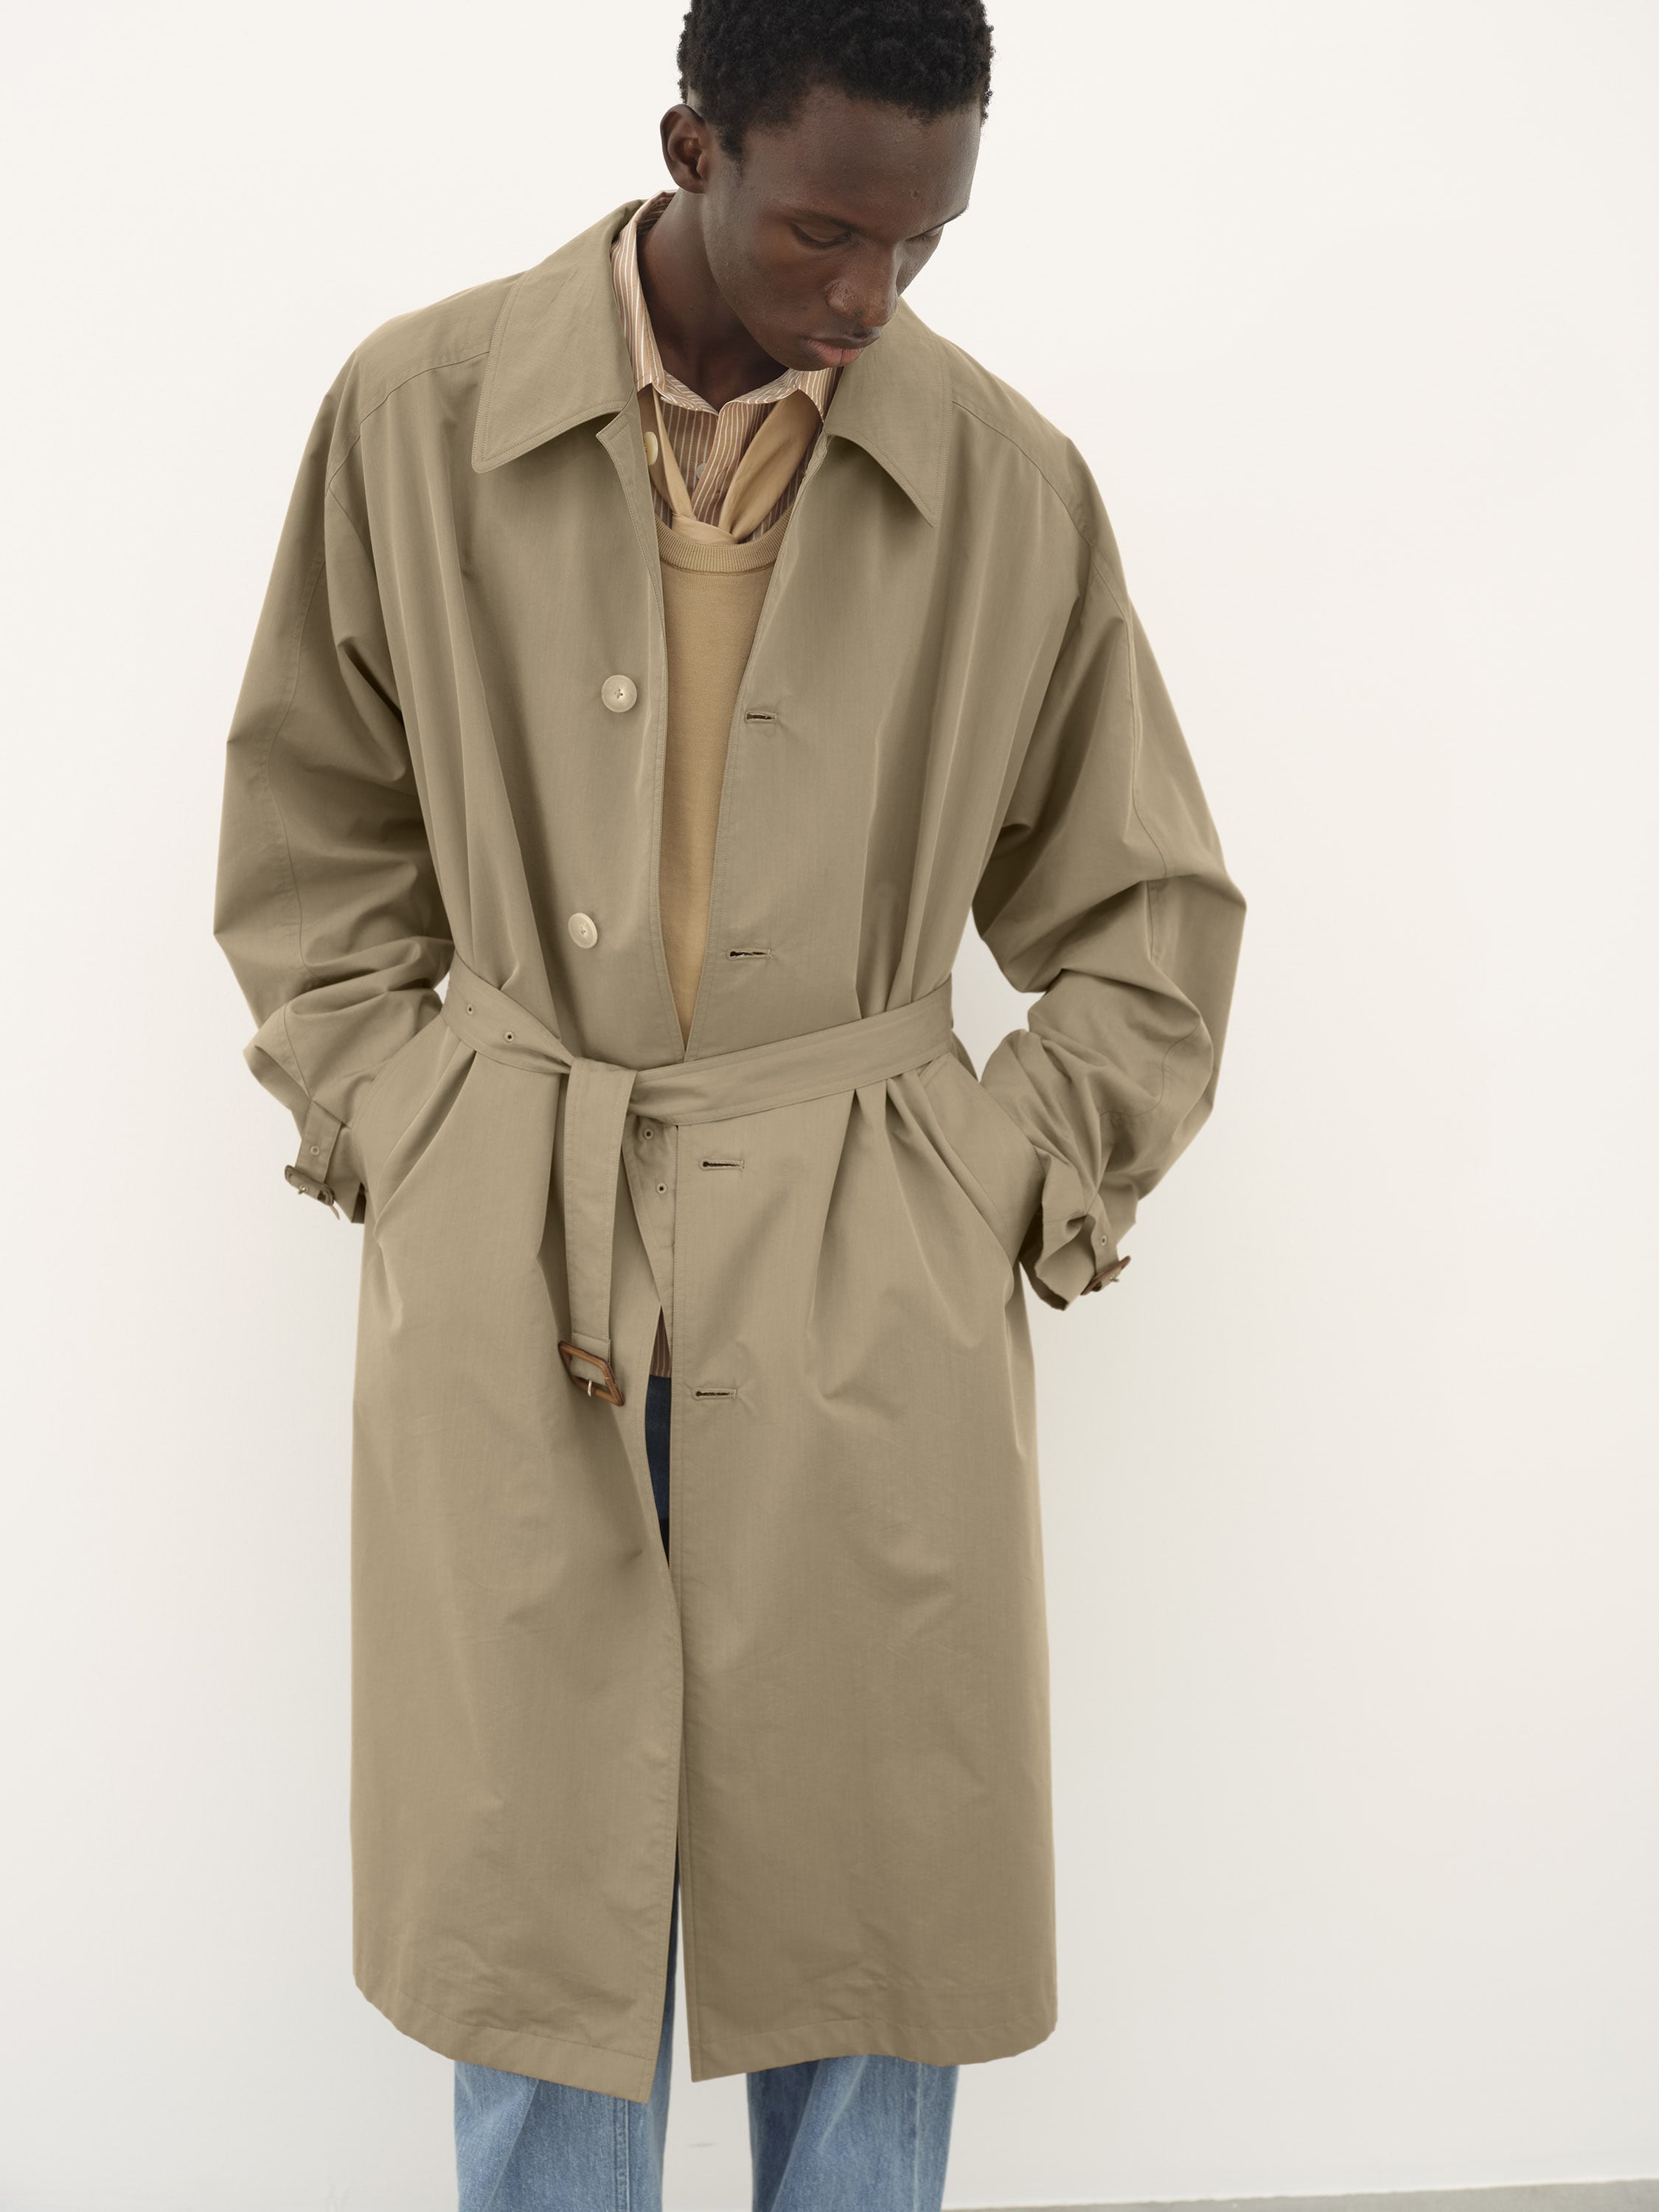 FINX POLYESTER WEATHER CHAMBRAY SOUTIEN COLLOAR COAT 詳細画像 BROWN CHAMBRAY 6